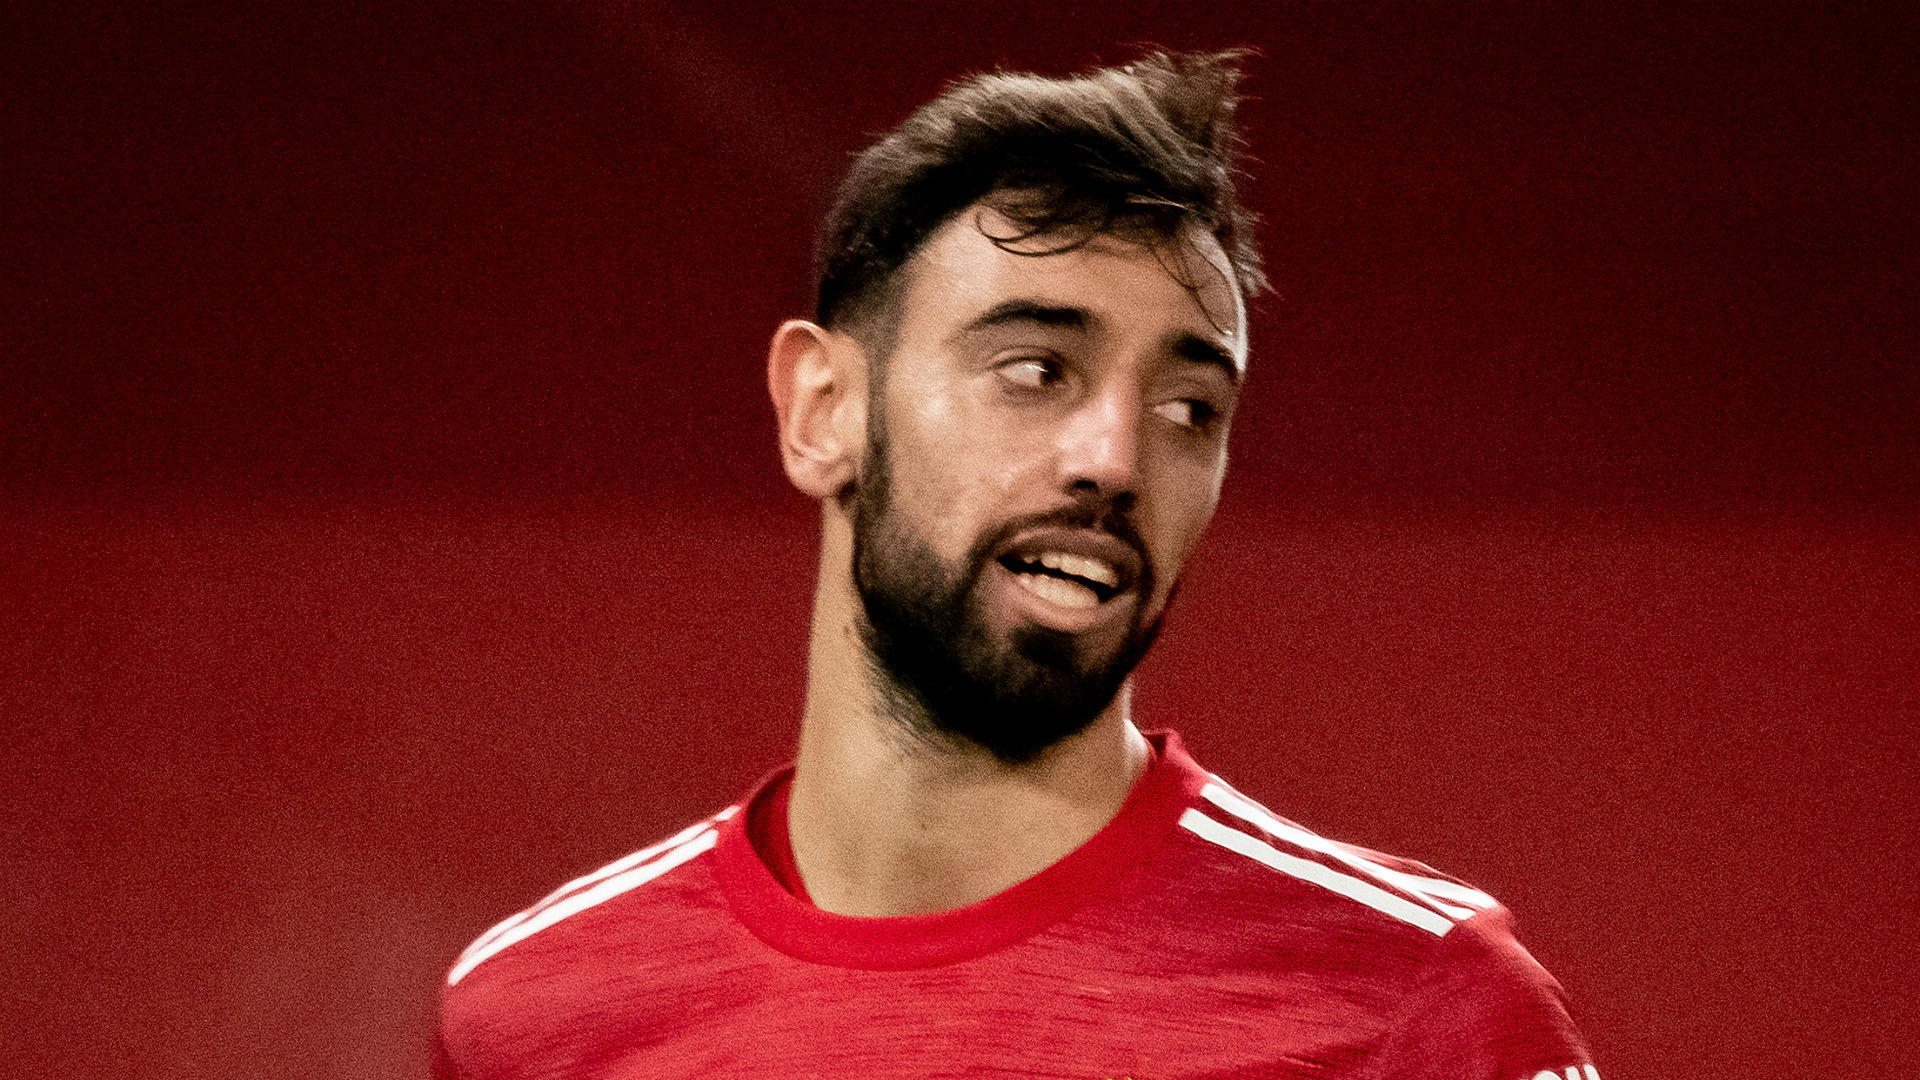 Bruno Fernandes was an option as a substitute for Manchester United as Donny van de Beek came into the team to face Liverpool in the FA Cup.